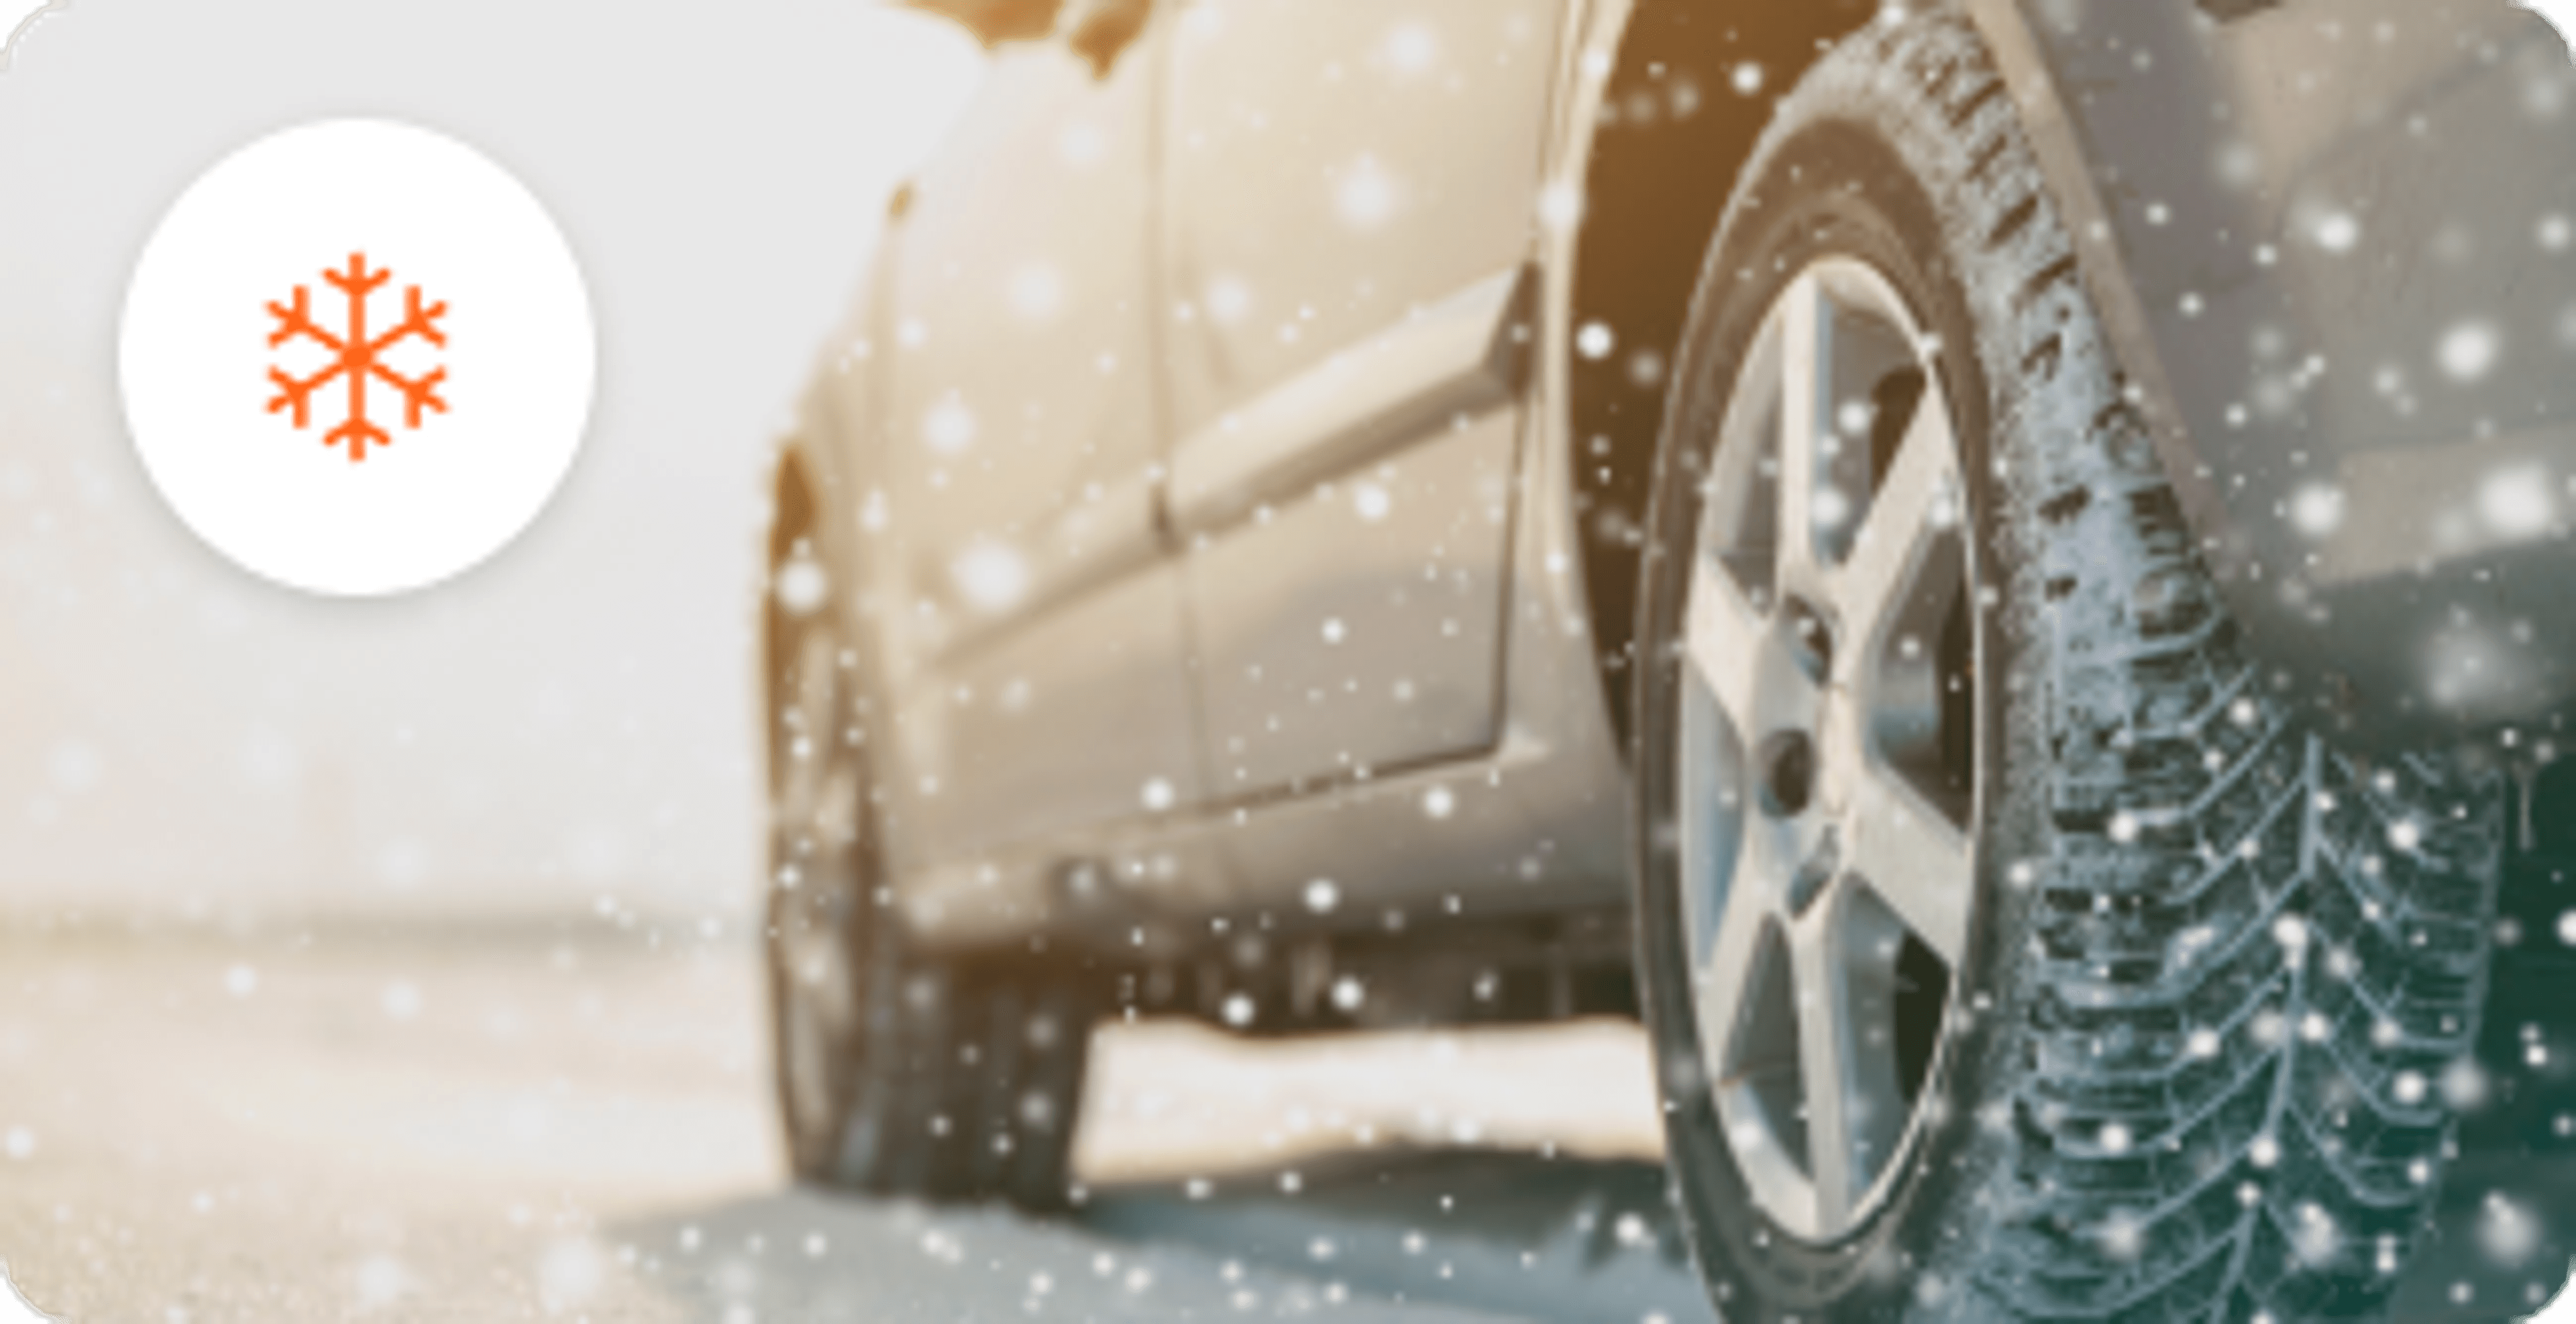 Save up to 40% on Winter tires today